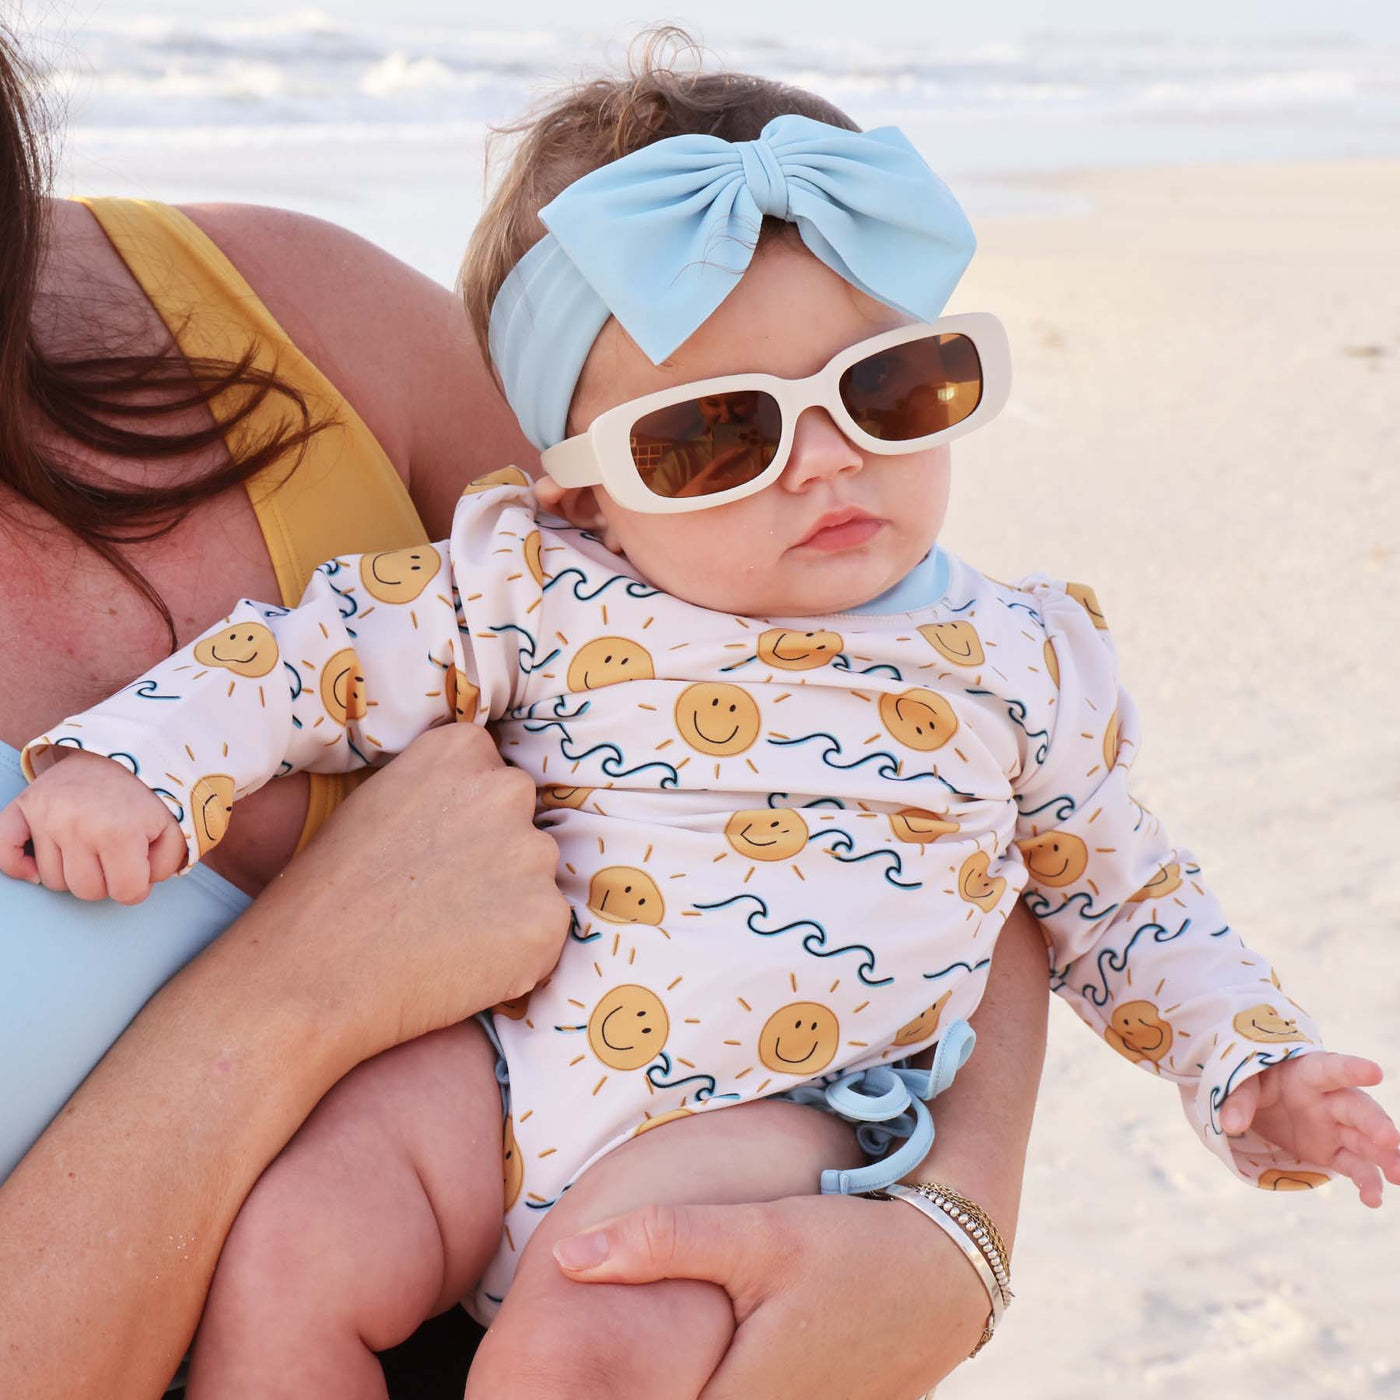 suns out baby rash guard with ruffles on the butt 